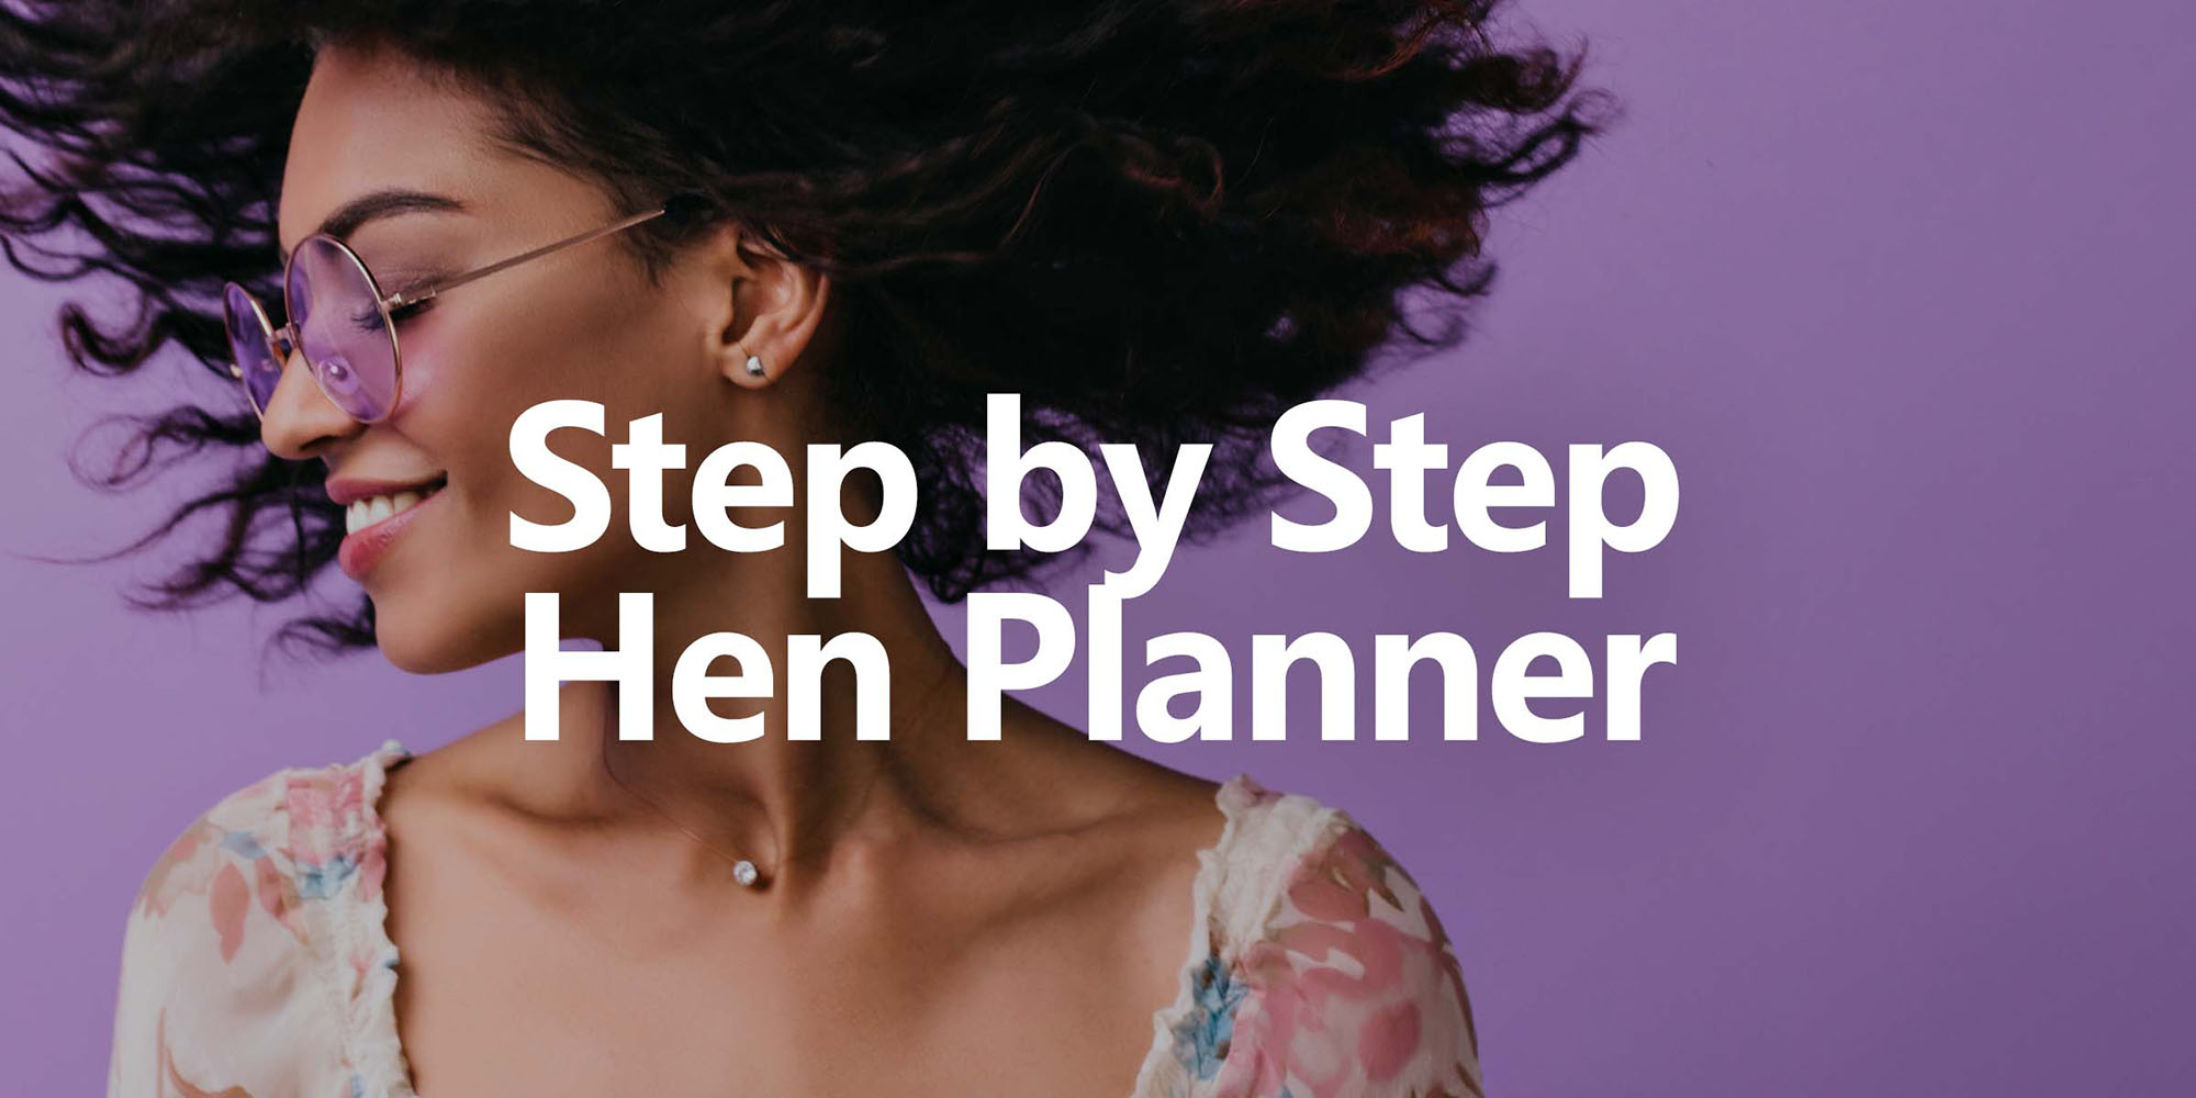 Step by Step Hen Planner